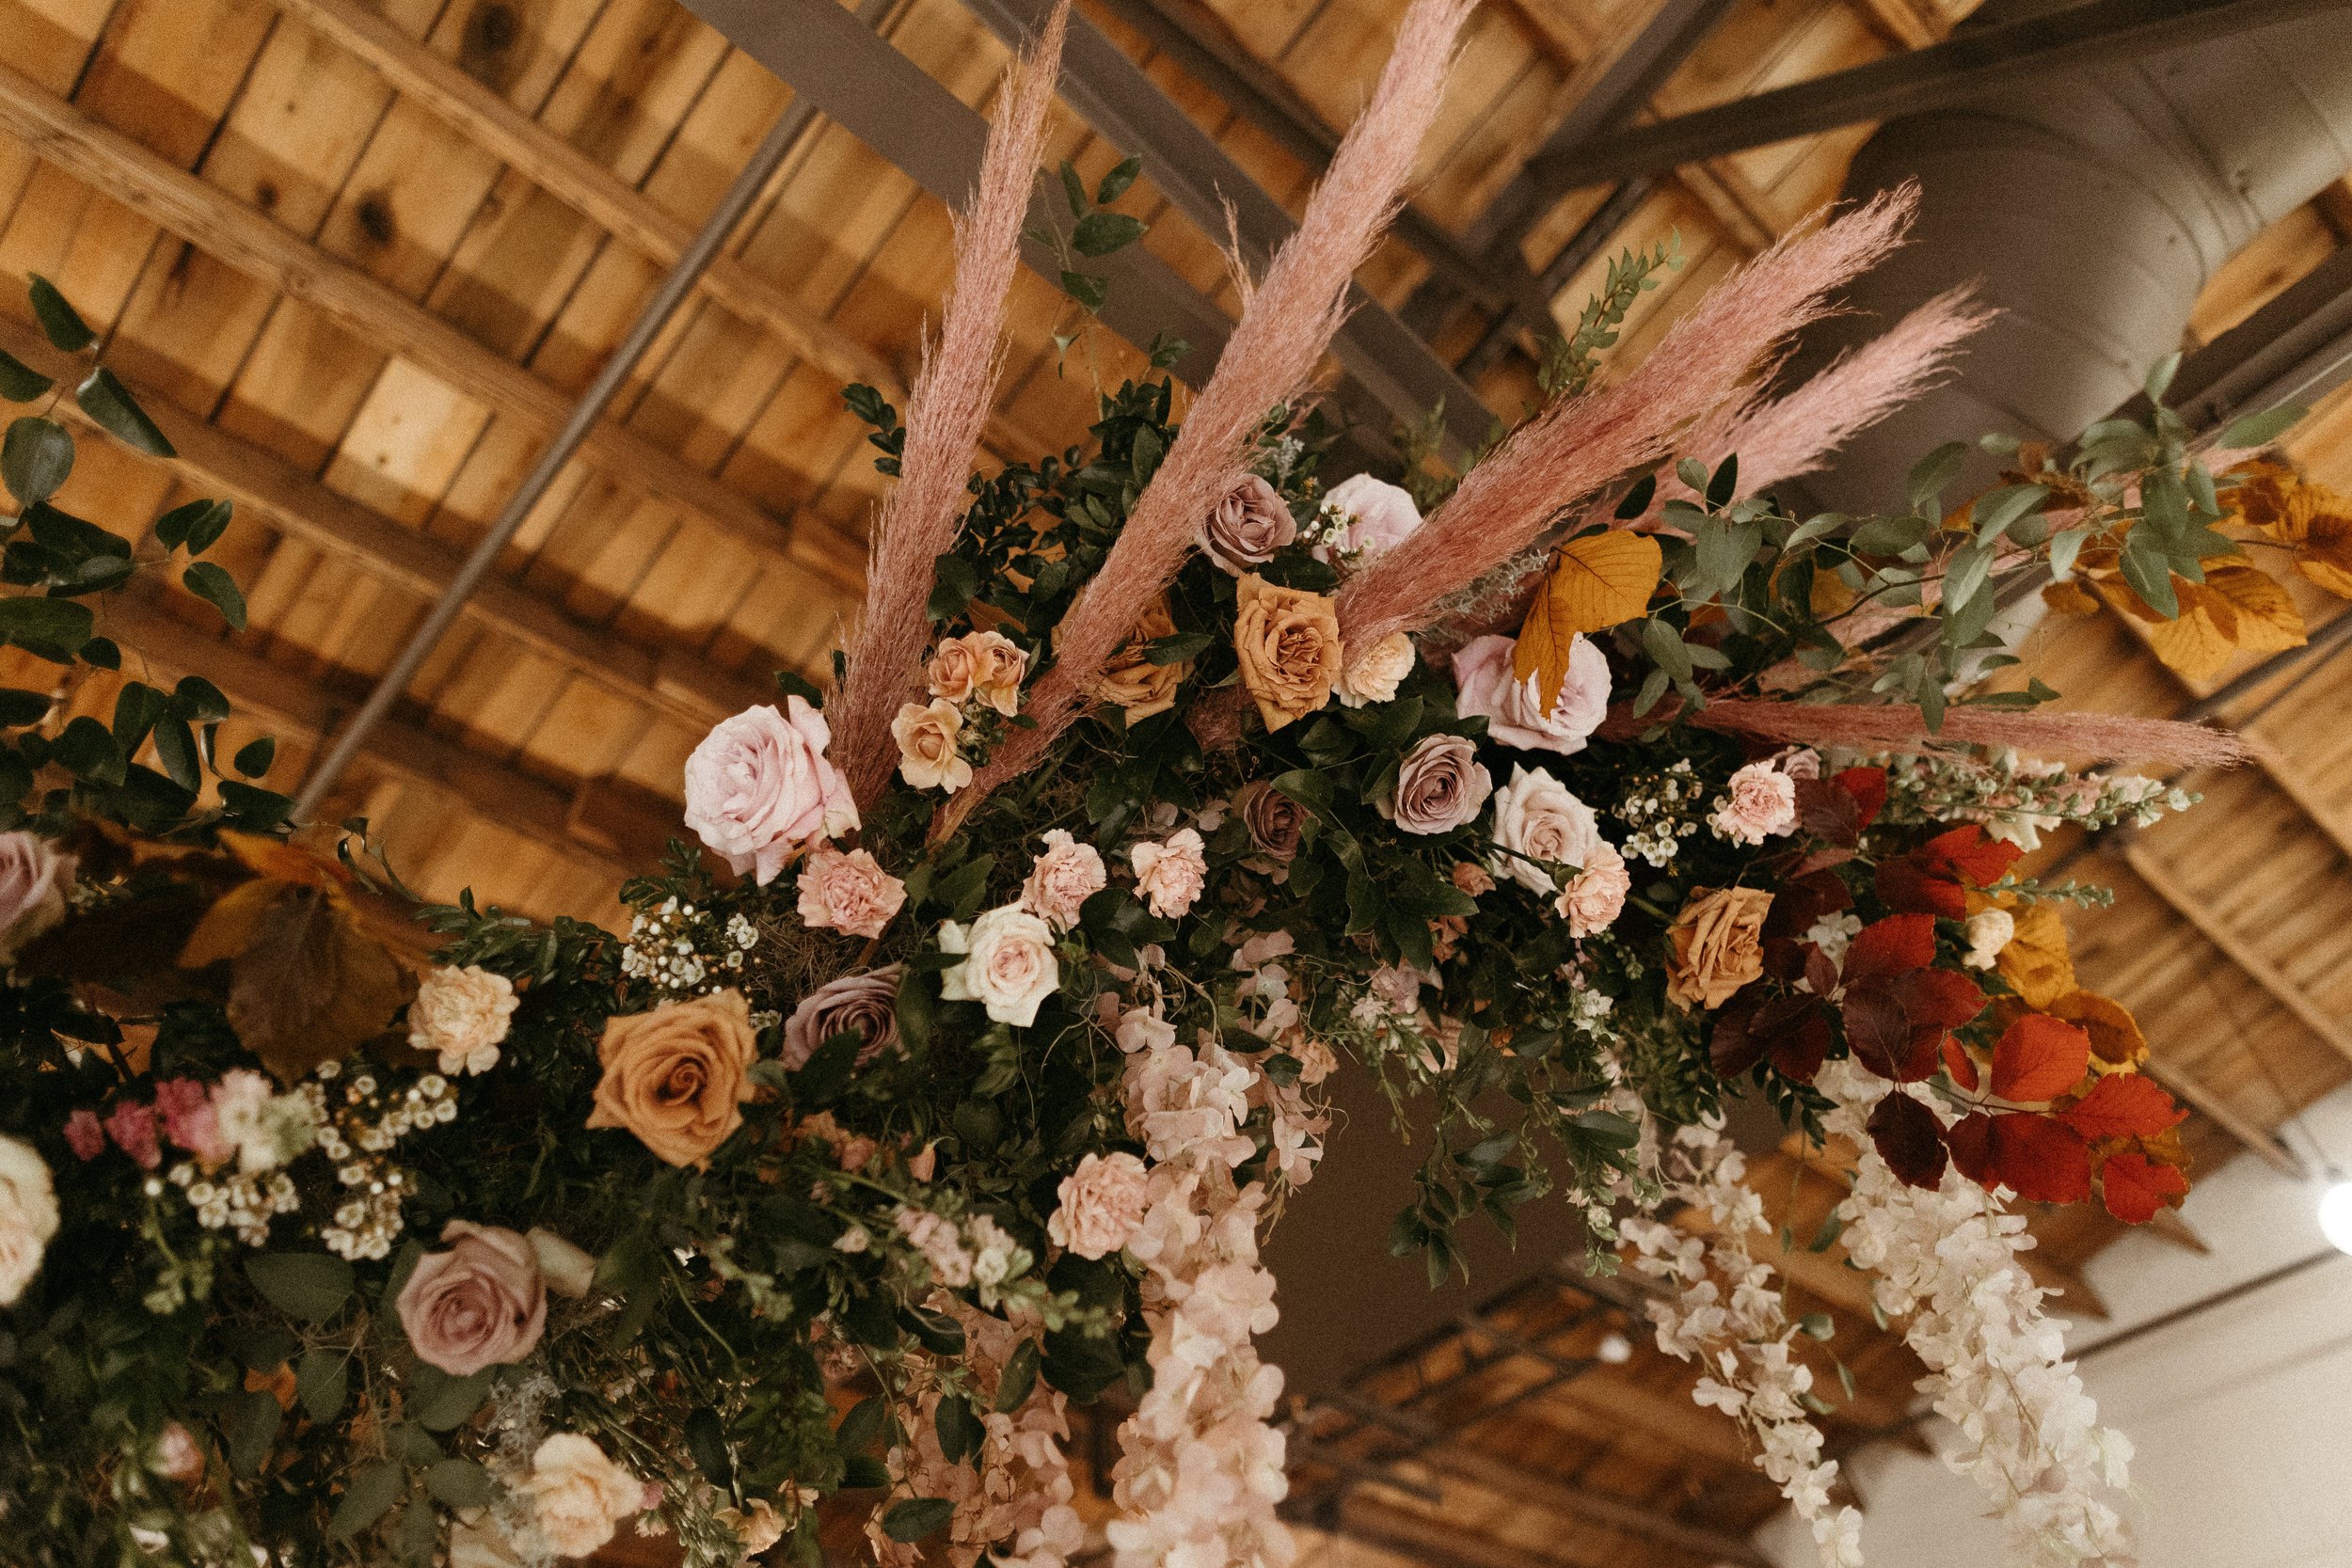 Stunning floral installations bring warmth to this Great Gatsby inspired wedding with florals of terra cotta, dusty pink, and burgundy hues. Petal heavy roses, copper beech, and pink pampas grass accents. Designed by Rosemary and Finch in Nashville,